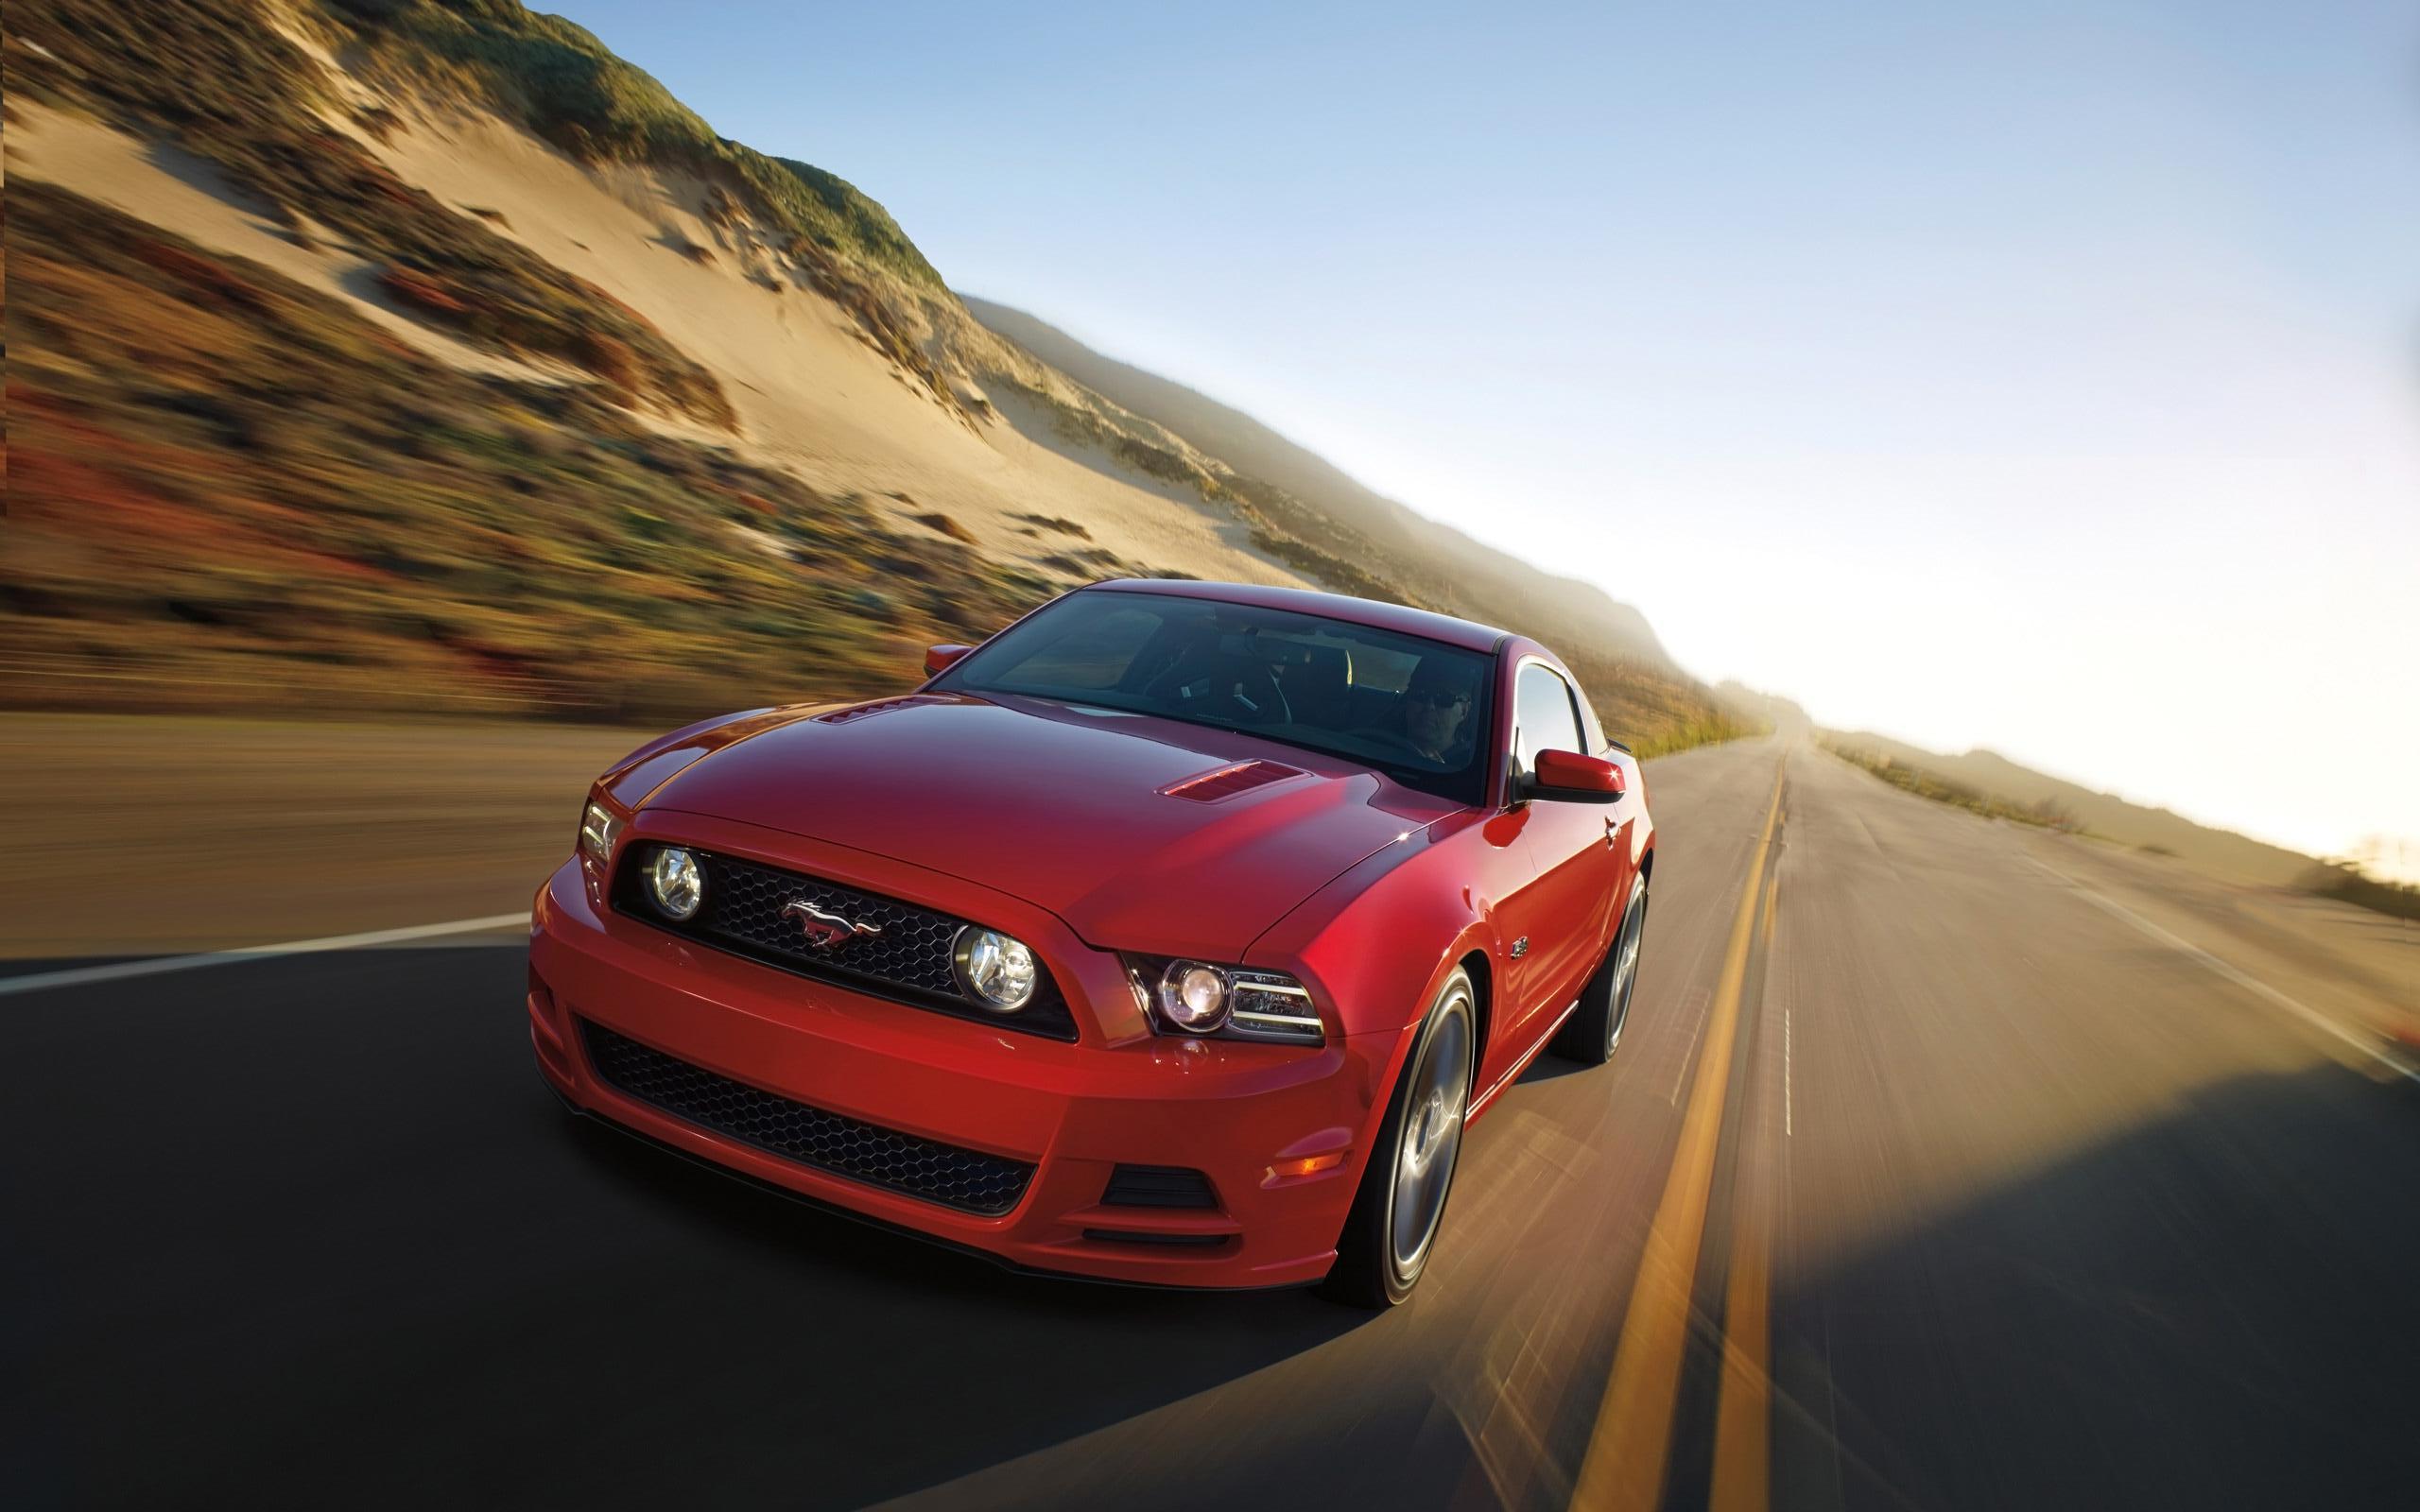 RED FORD MUSTANG MOTION WALLPAPER (9919)